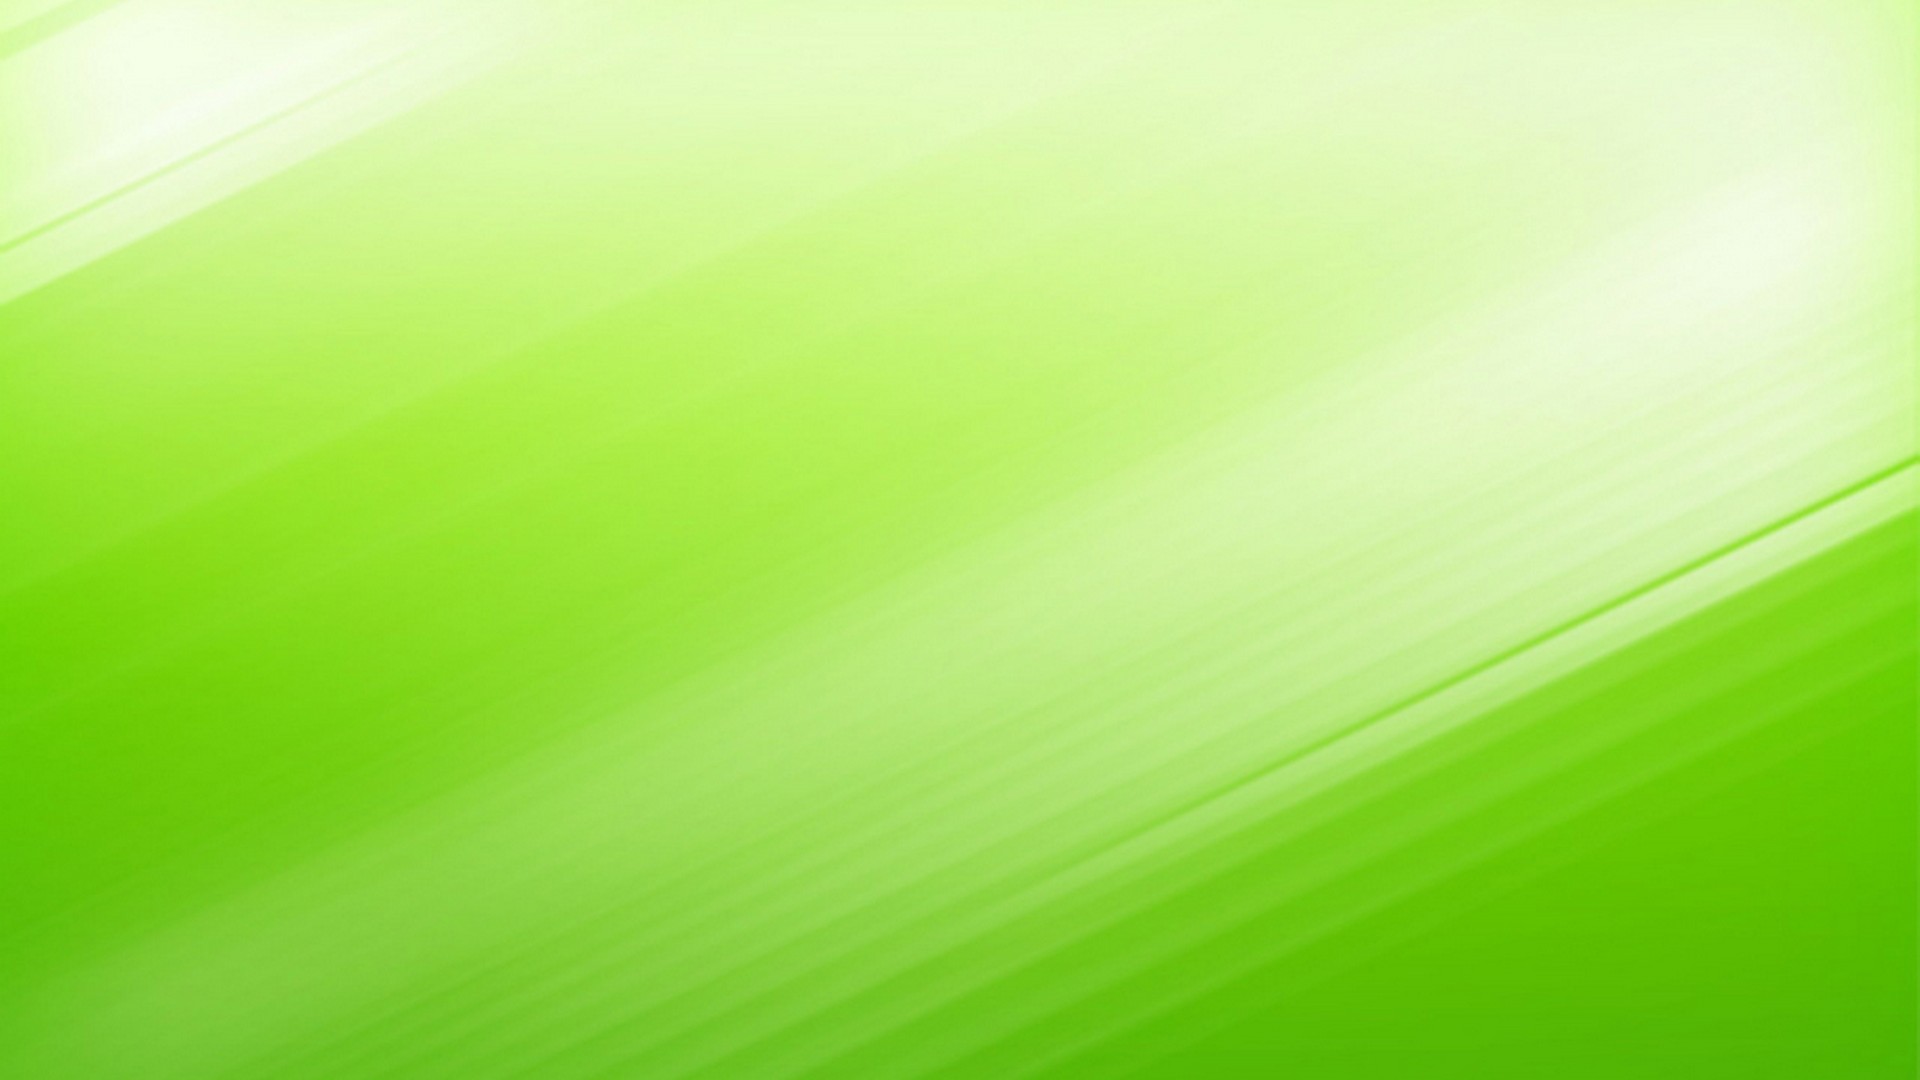 Lime Green Desktop Wallpaper with image resolution 1920x1080 pixel. You can use this wallpaper as background for your desktop Computer Screensavers, Android or iPhone smartphones